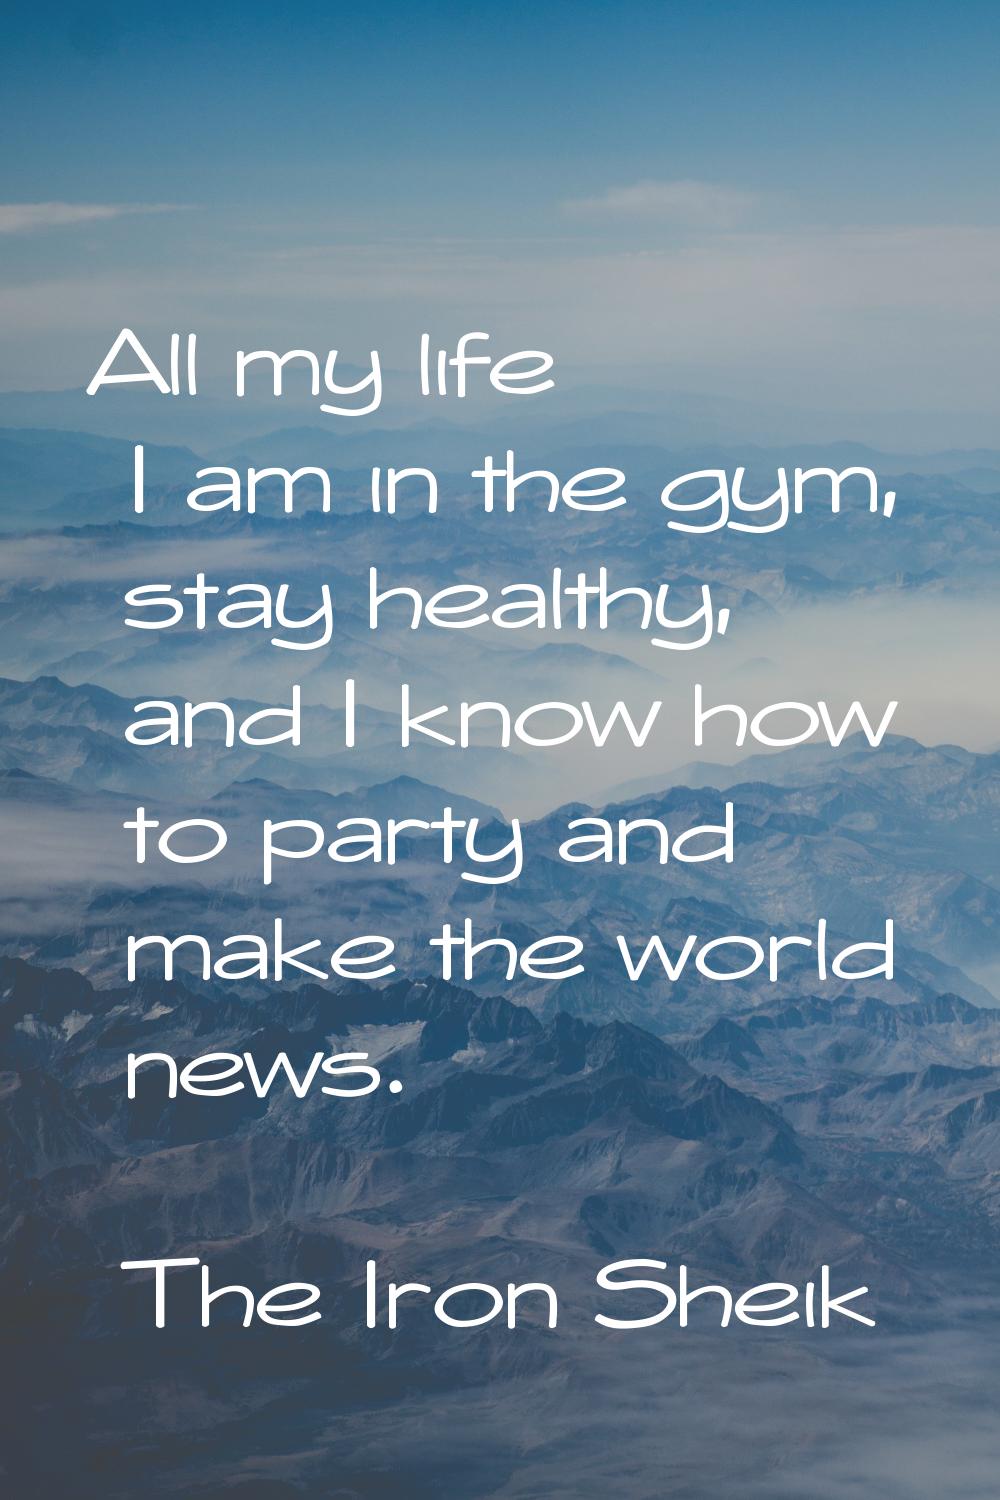 All my life I am in the gym, stay healthy, and I know how to party and make the world news.